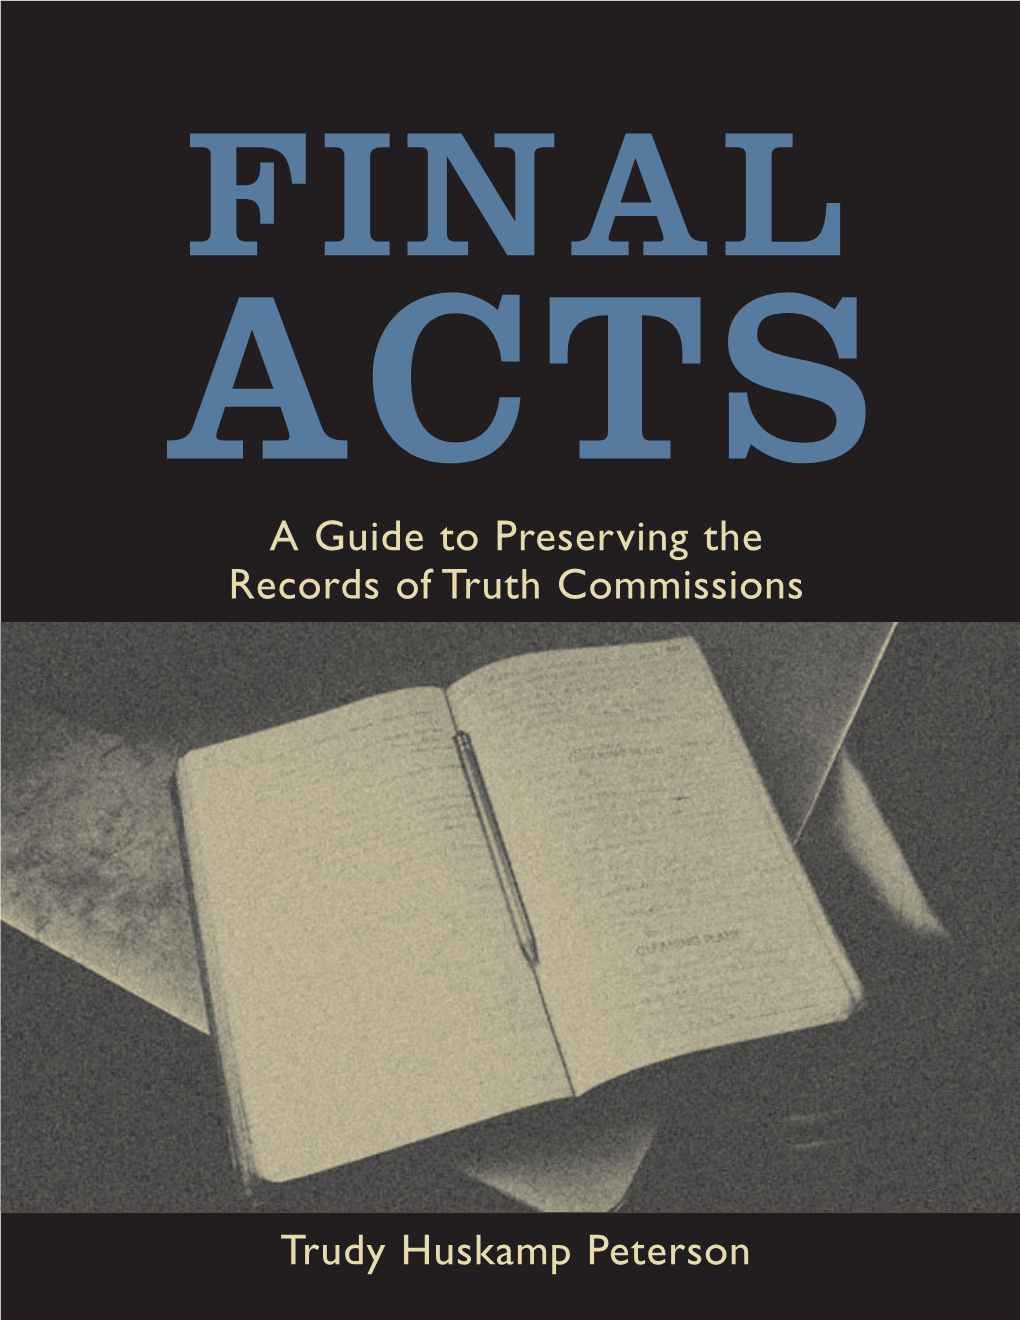 A Guide to Preserving the Records of Truth Commissions Trudy Huskamp